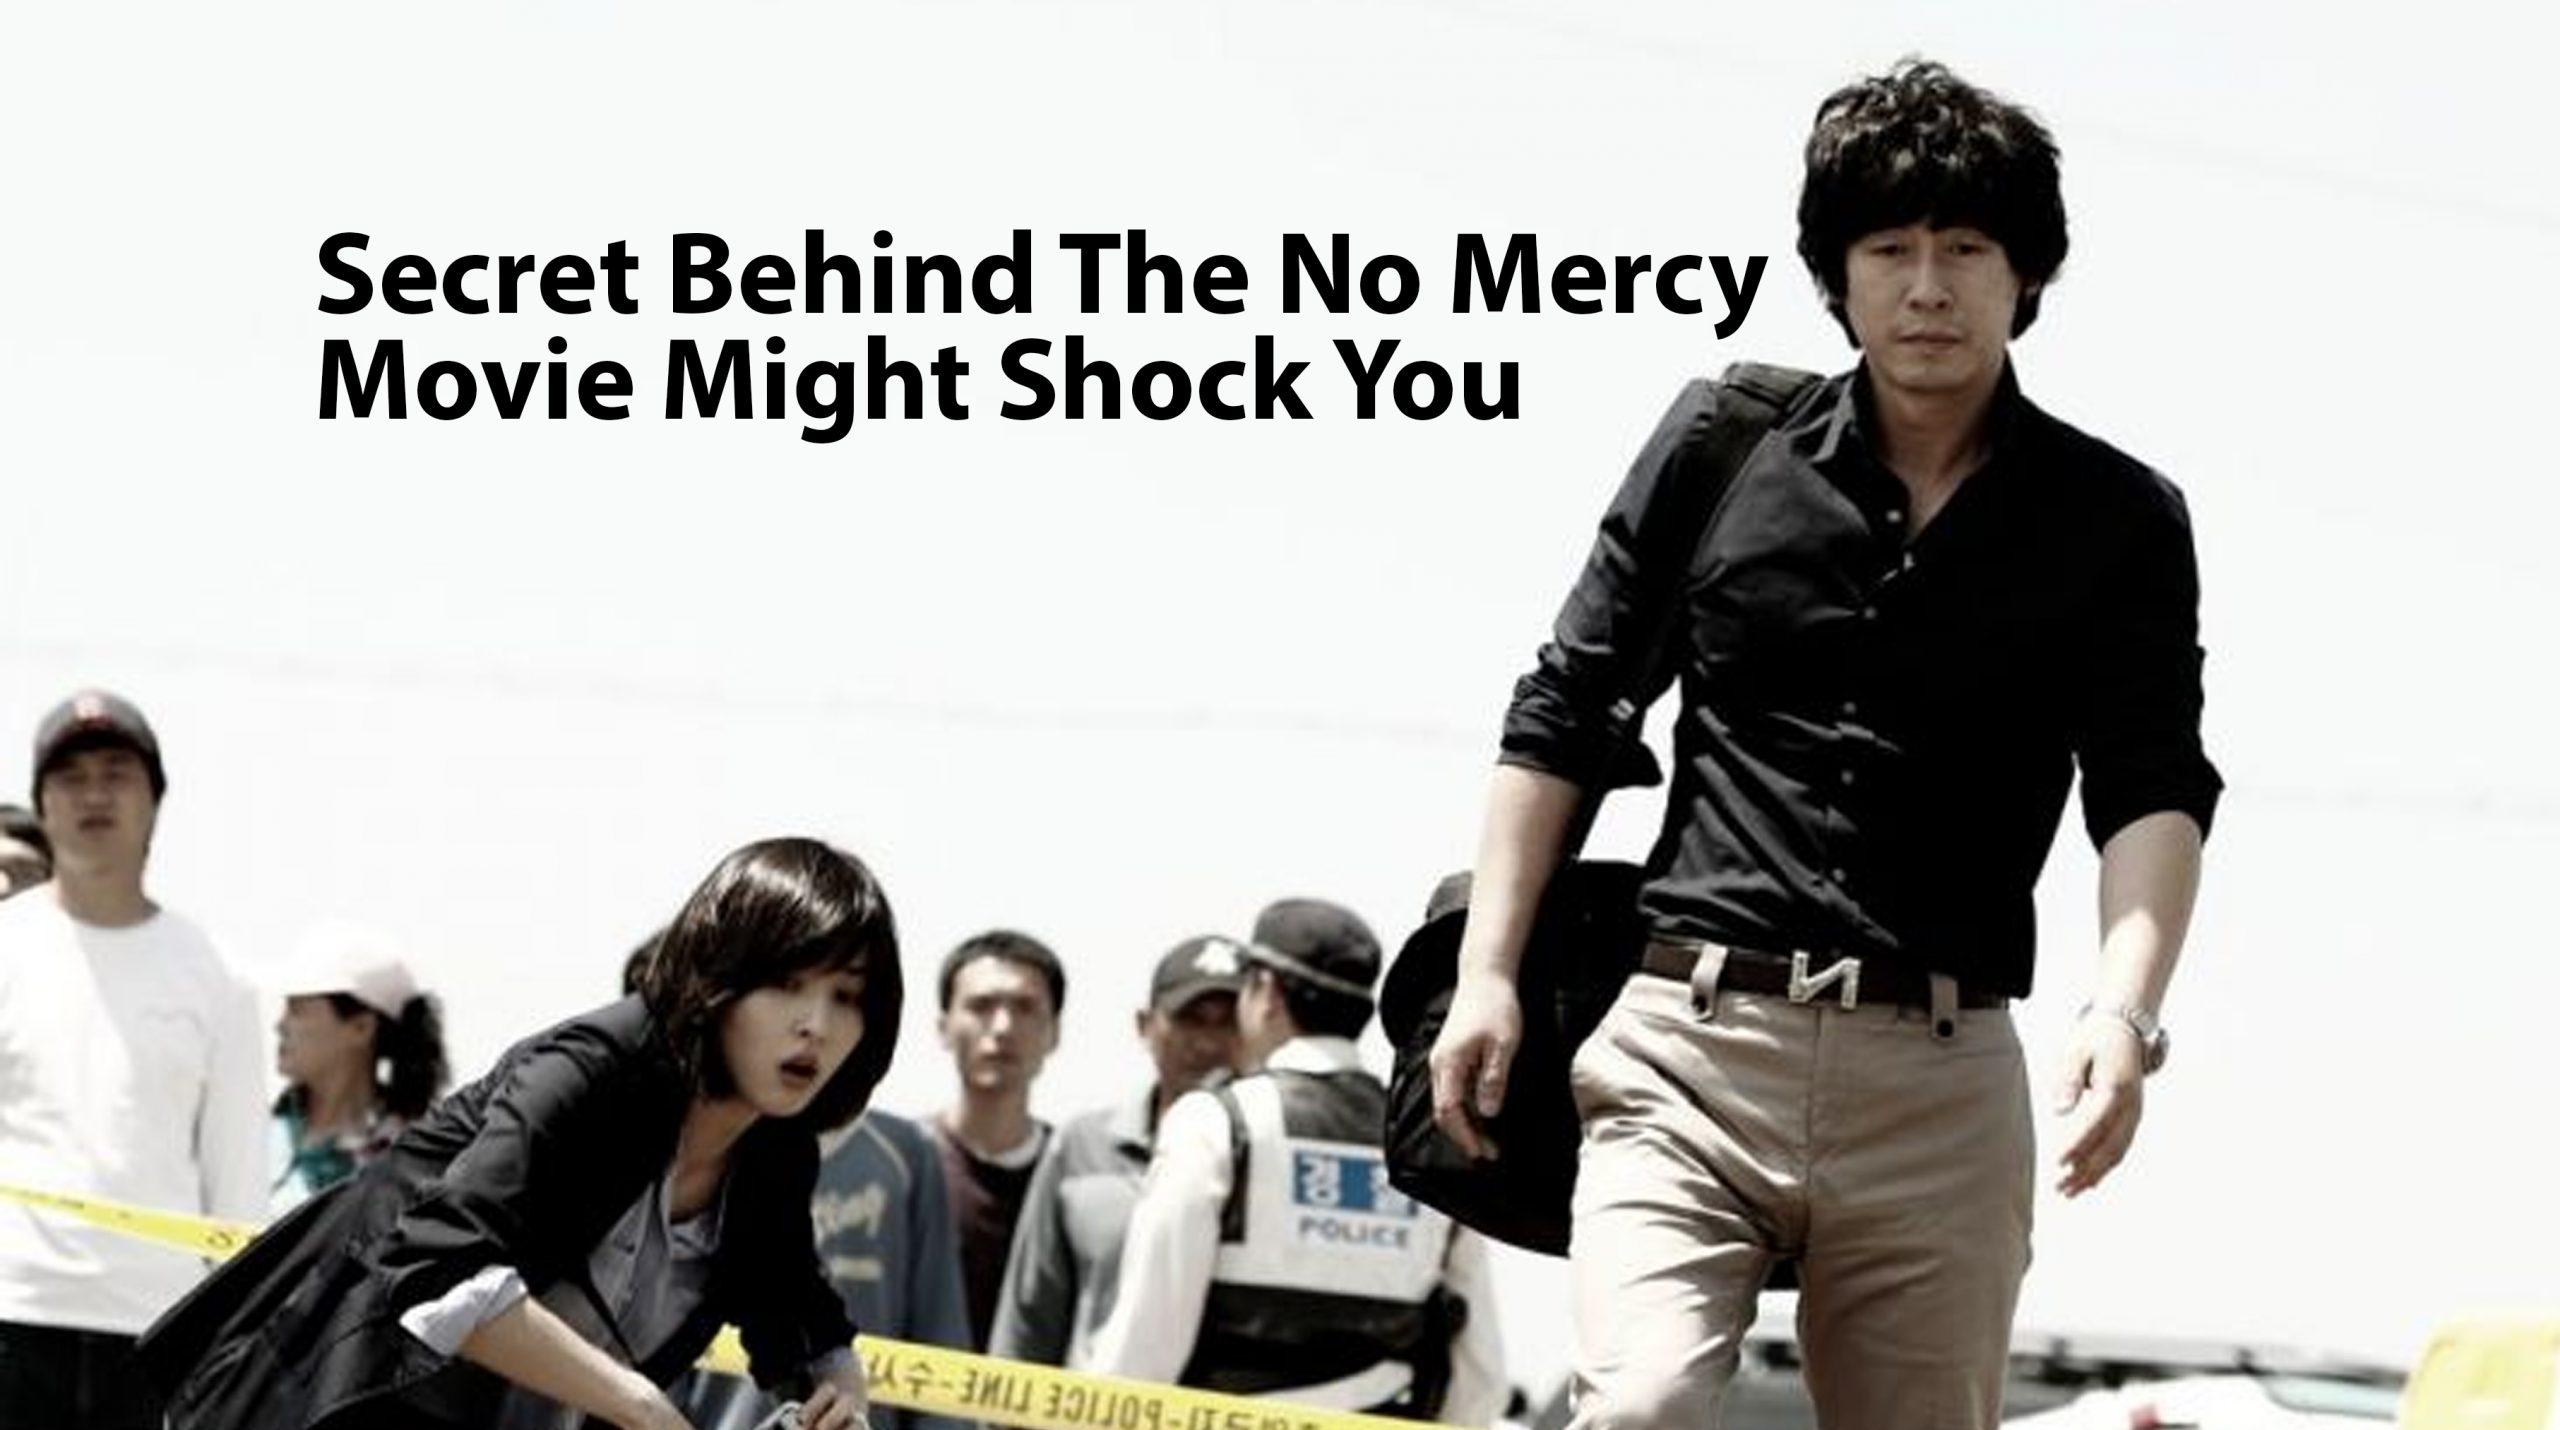 Secret Behind The No Mercy Movie Might Shock You